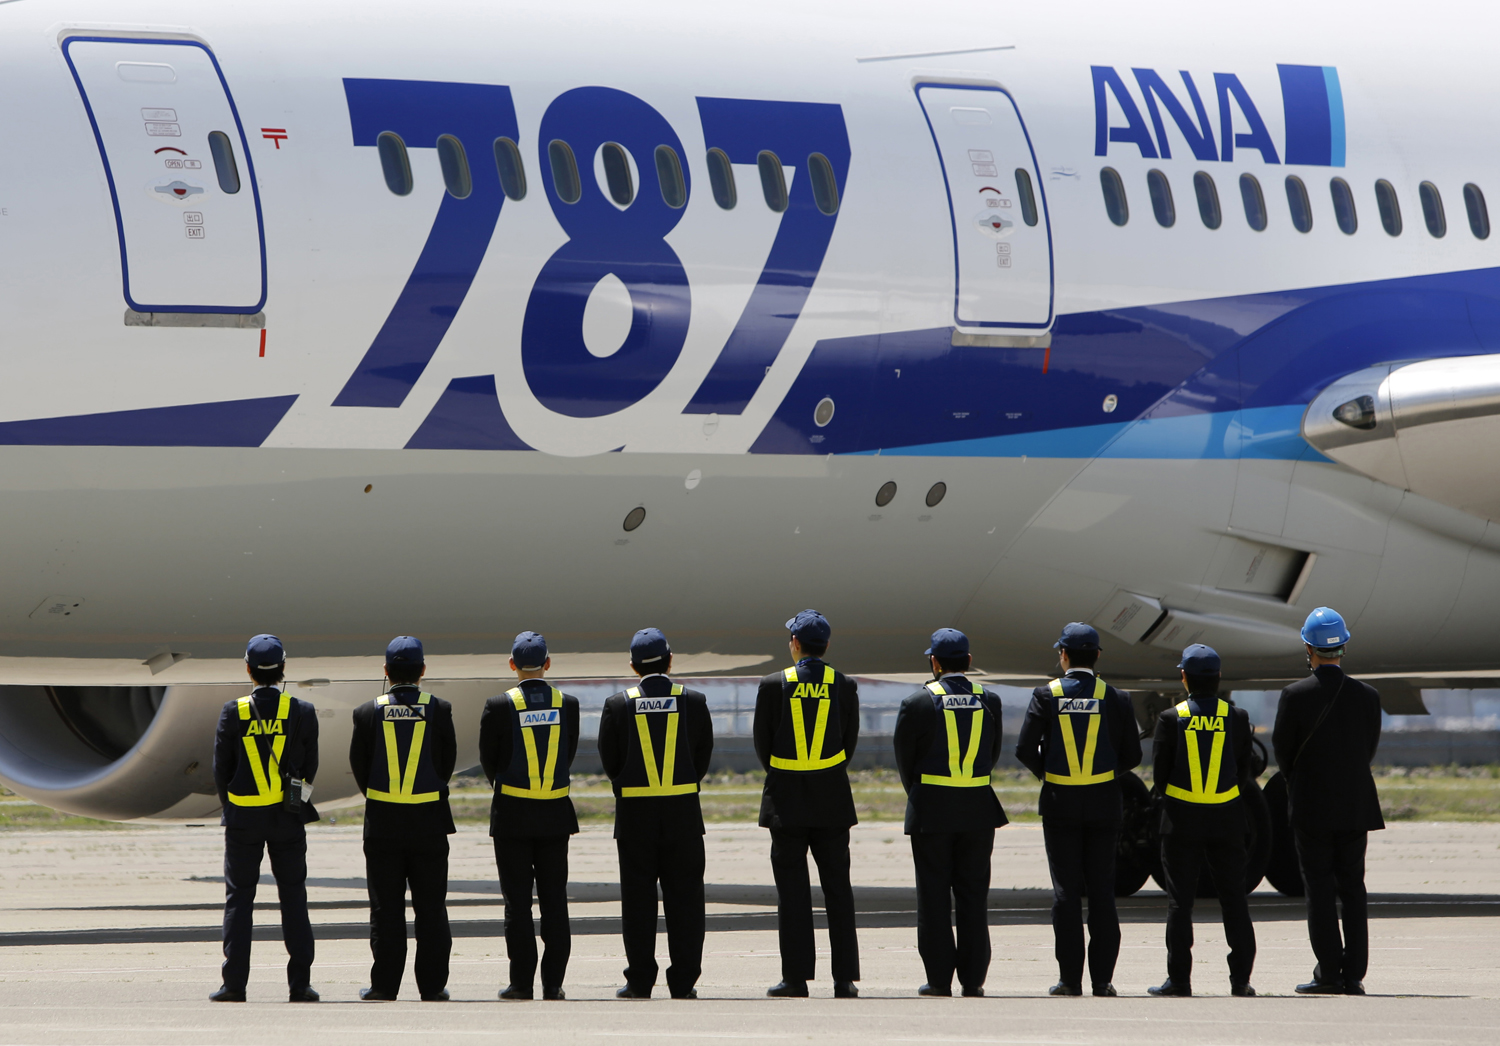 All Nippon Airways' employees stand in front of the company's Boeing 787 Dreamliner plane after it's test flight at Haneda airport in Tokyo on April 28, 2013 (Yuya Shino / Reuters)